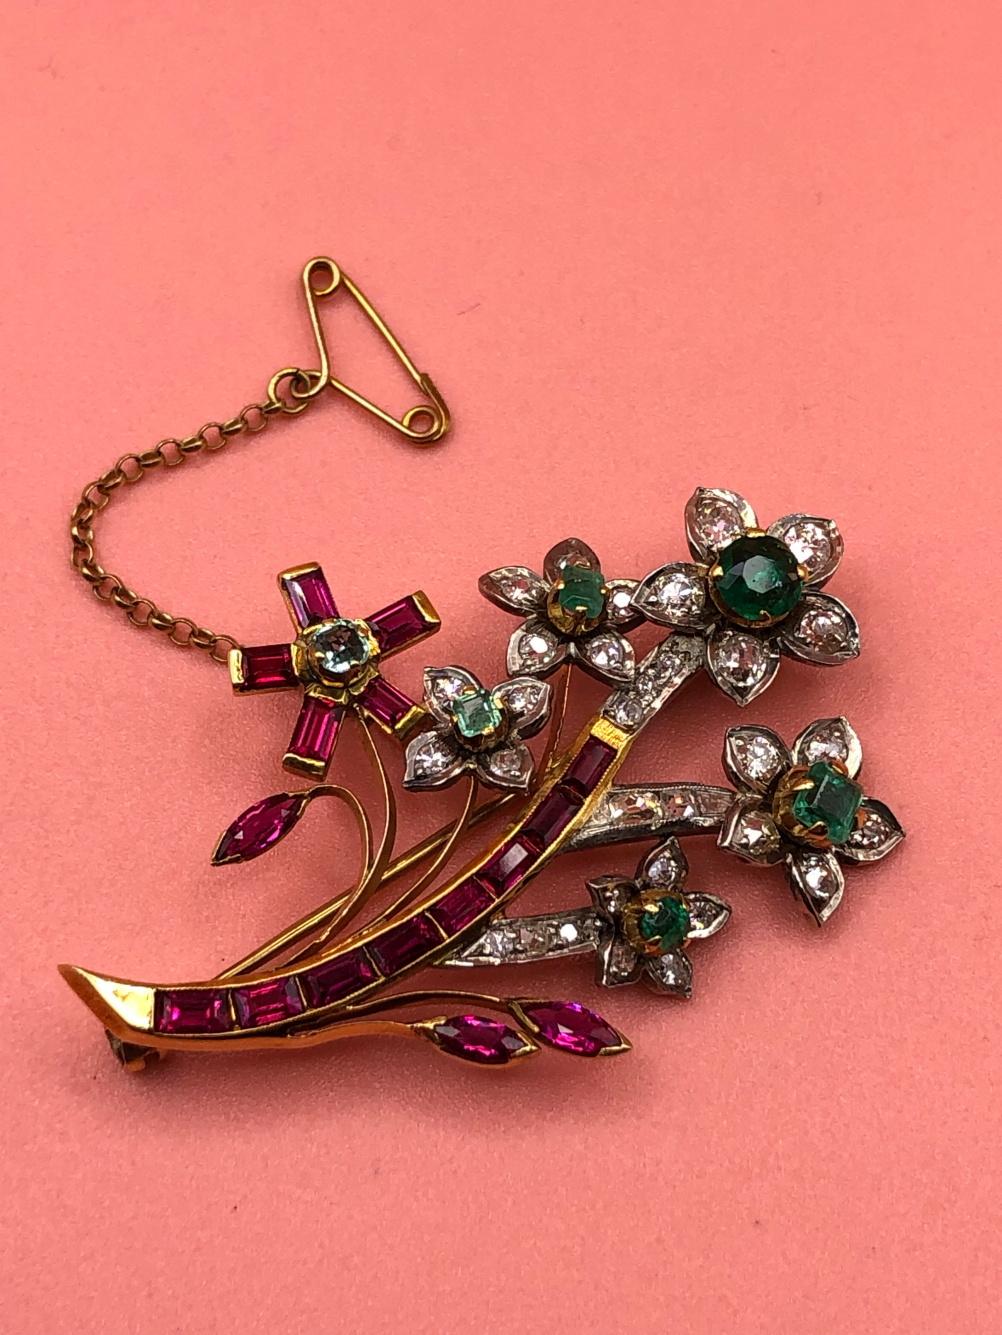 A 20th CENTURY DIAMOND, EMERALD AND RUBY SPRAY BROOCH. THE BROOCH UNHALLMARKED, ASSESSED VARIOUSLY - Image 2 of 6